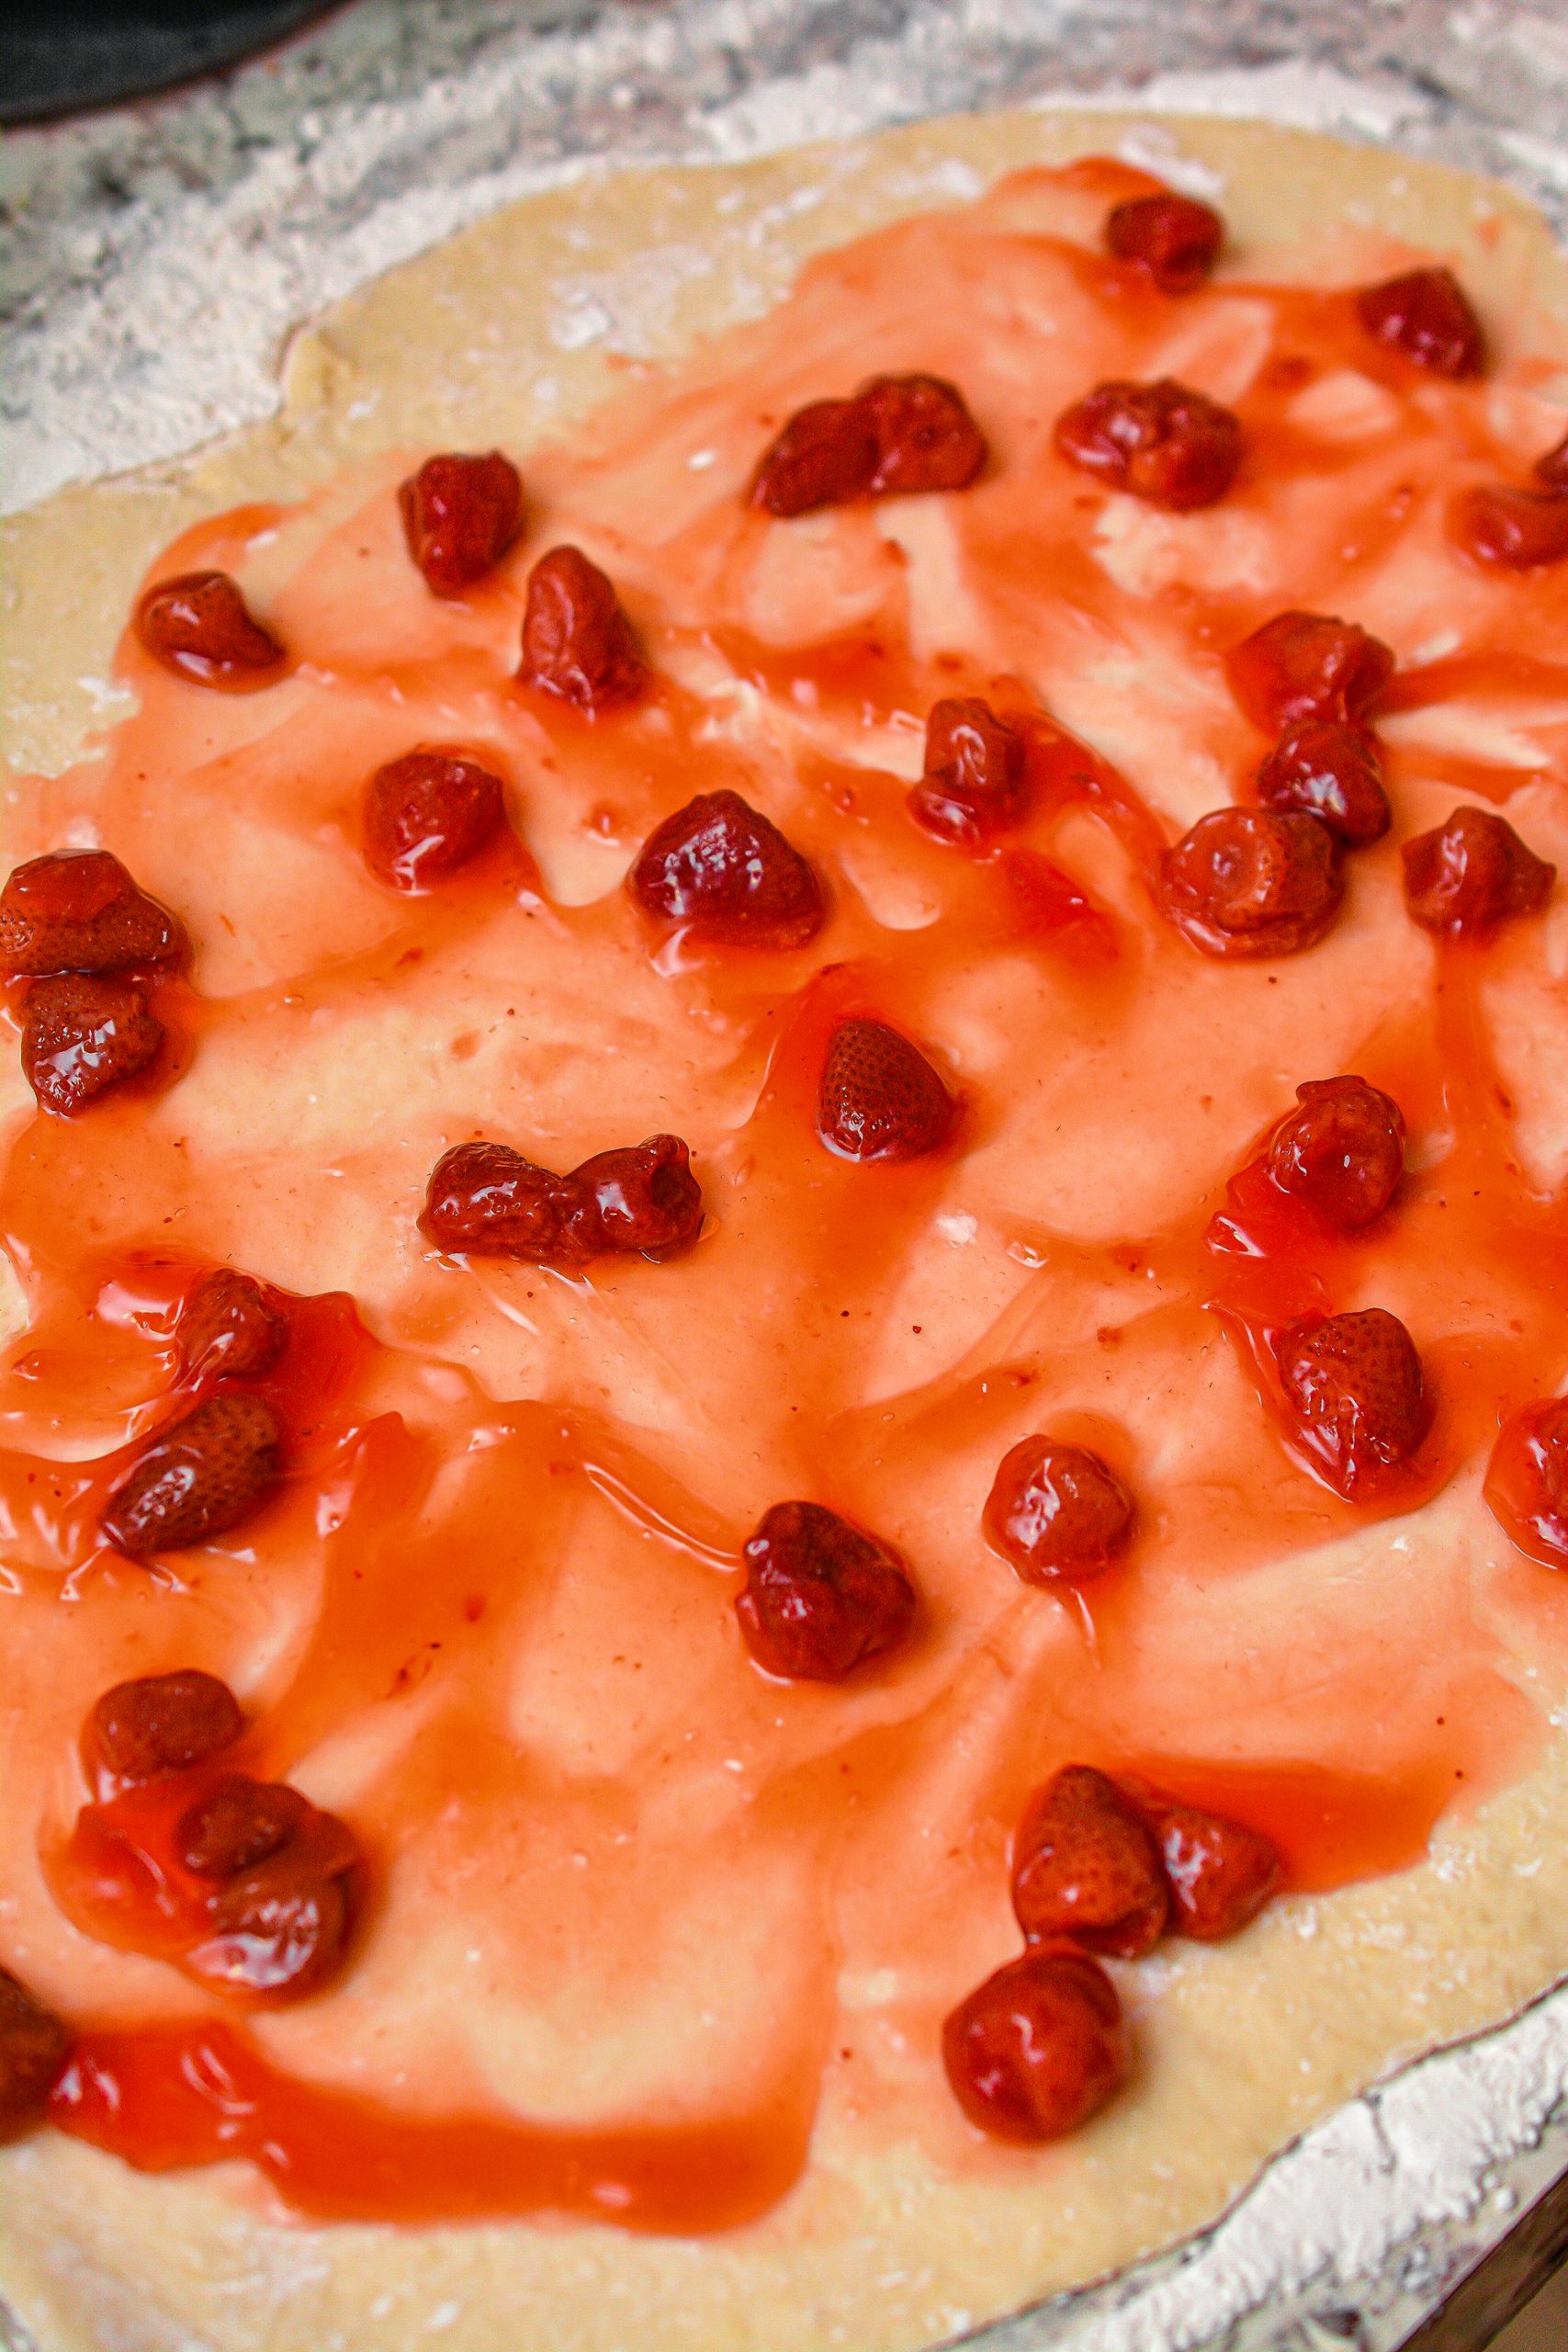  Layer the strawberry filling on top of the dough, and then sprinkle with ½ tsp of the sugar and 2 tsp of cinnamon.